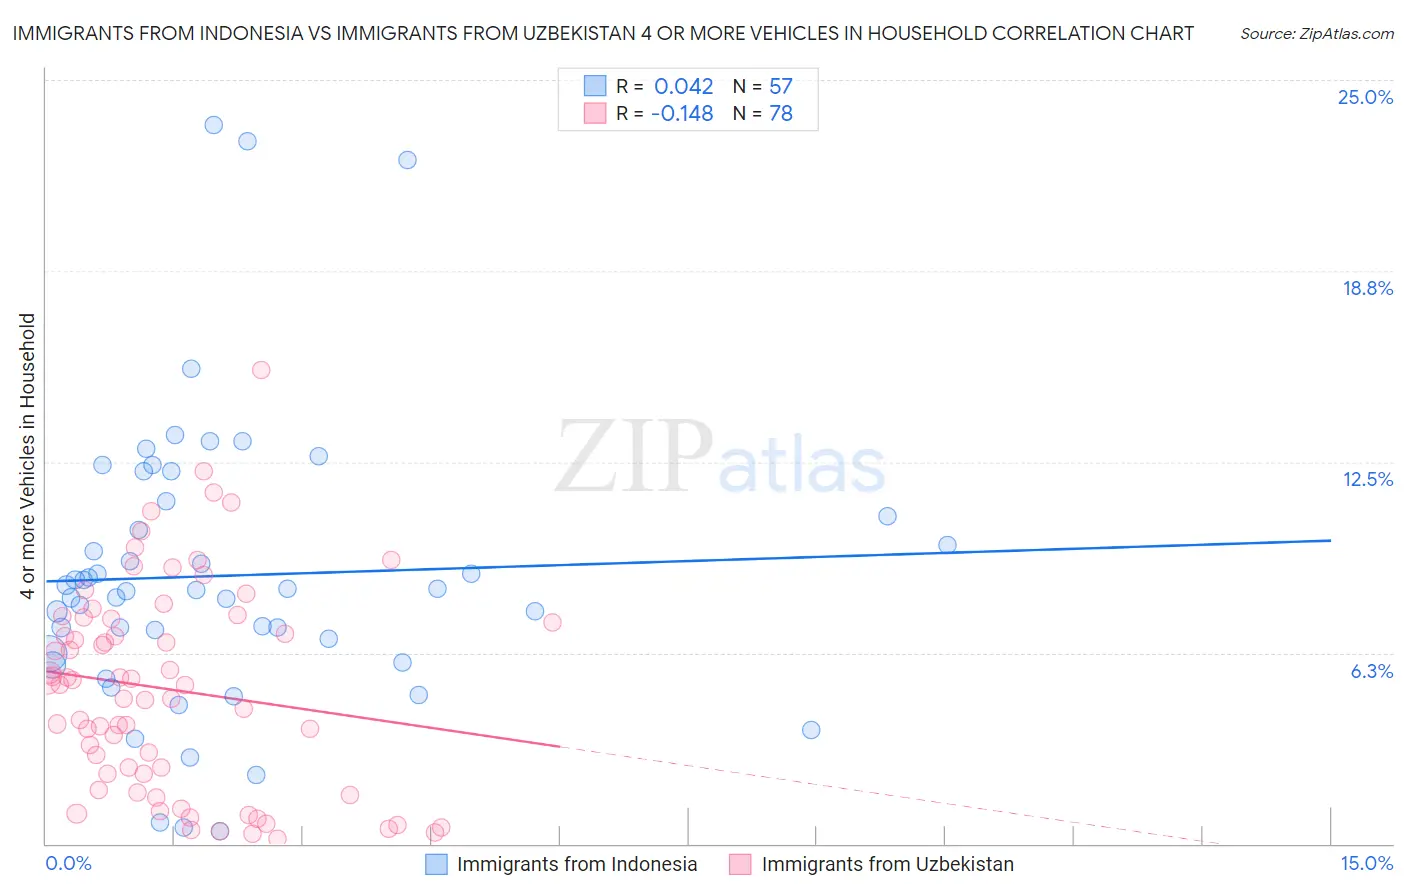 Immigrants from Indonesia vs Immigrants from Uzbekistan 4 or more Vehicles in Household